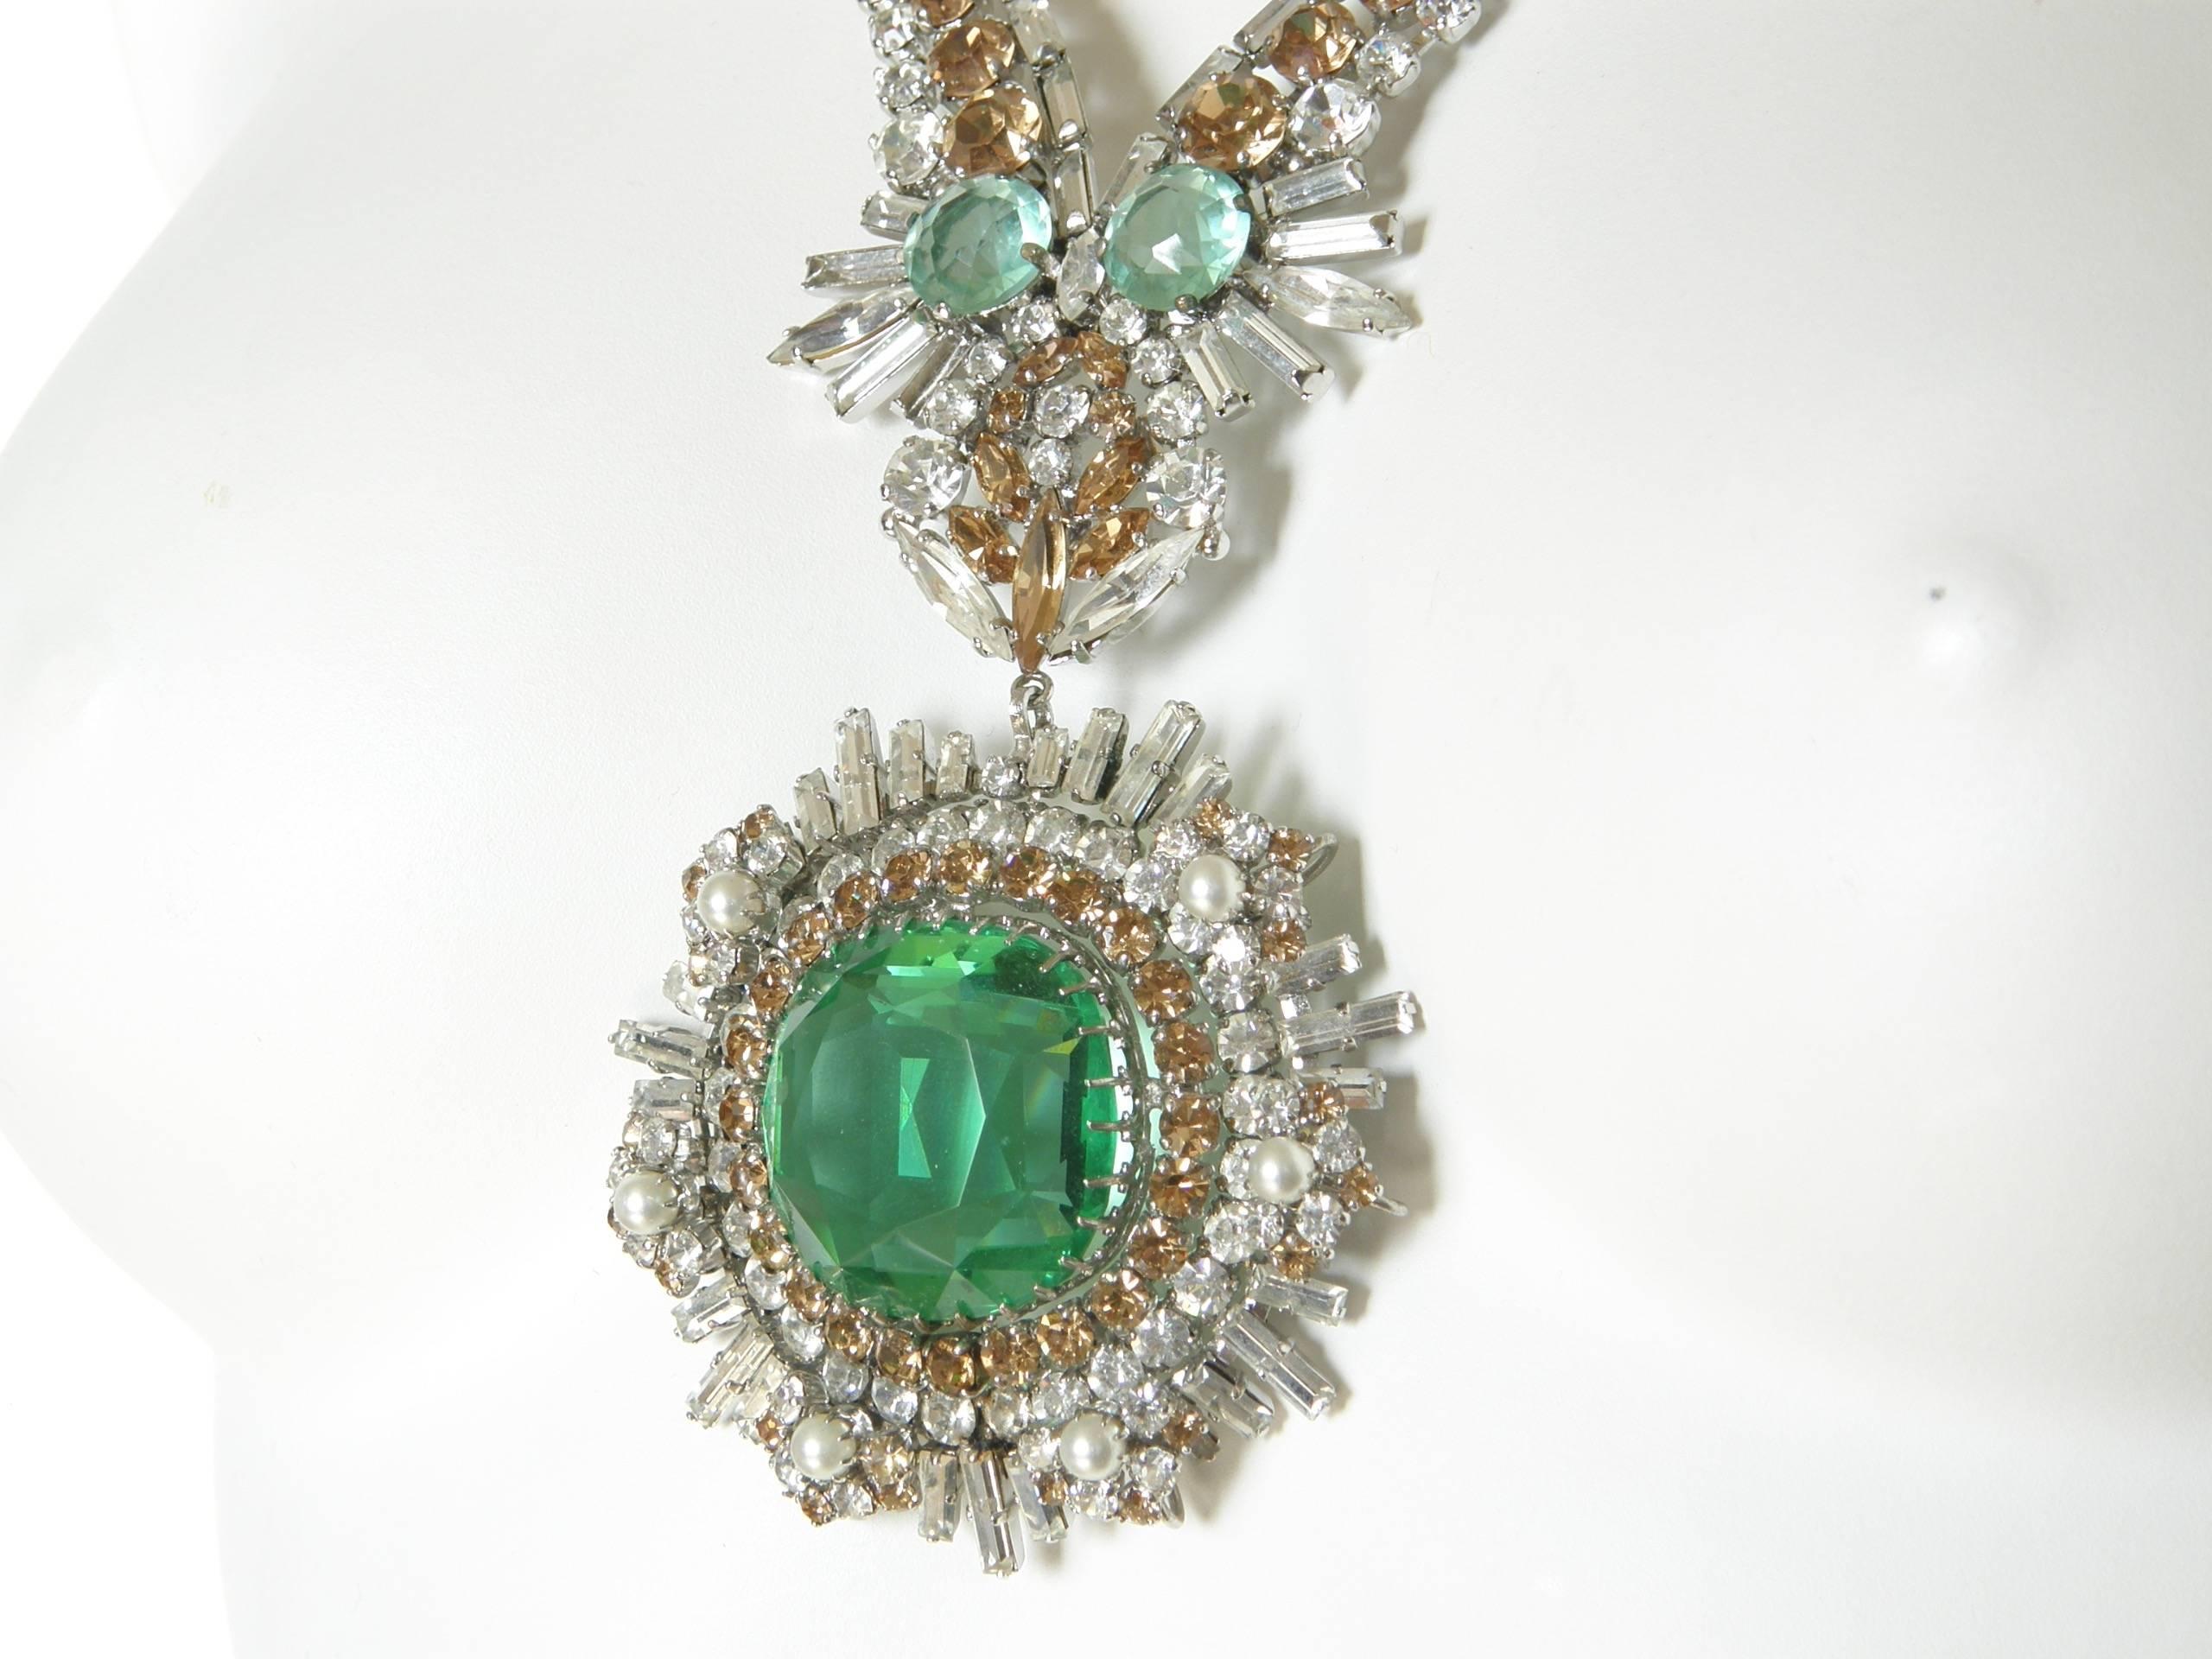 West German Rhinestone Necklace with Faux Emeralds Diamonds and Citrines 1